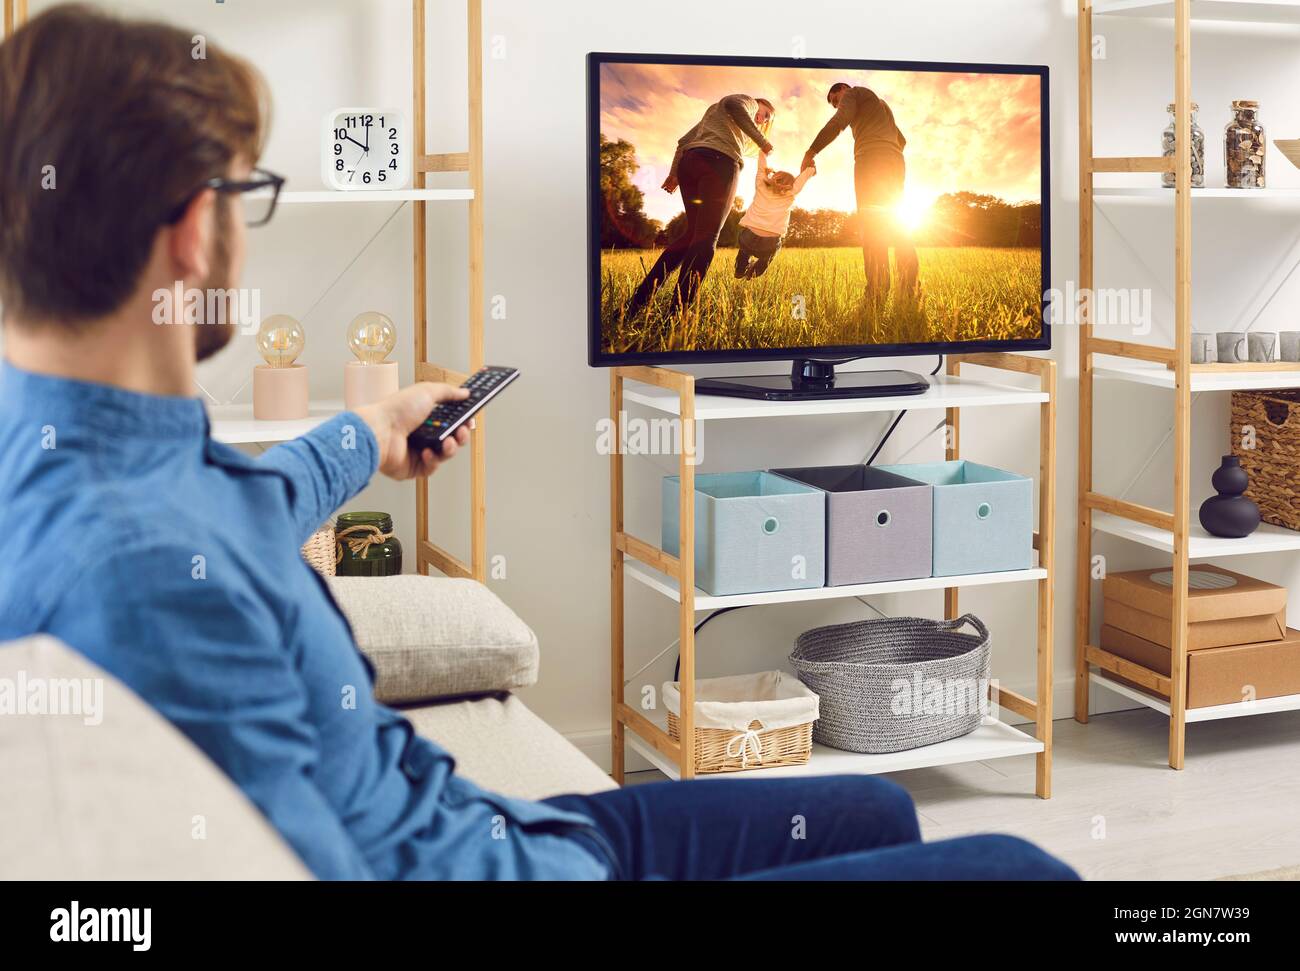 Relaxed man sitting on a couch at home and watching a movie on a large TV screen Stock Photo